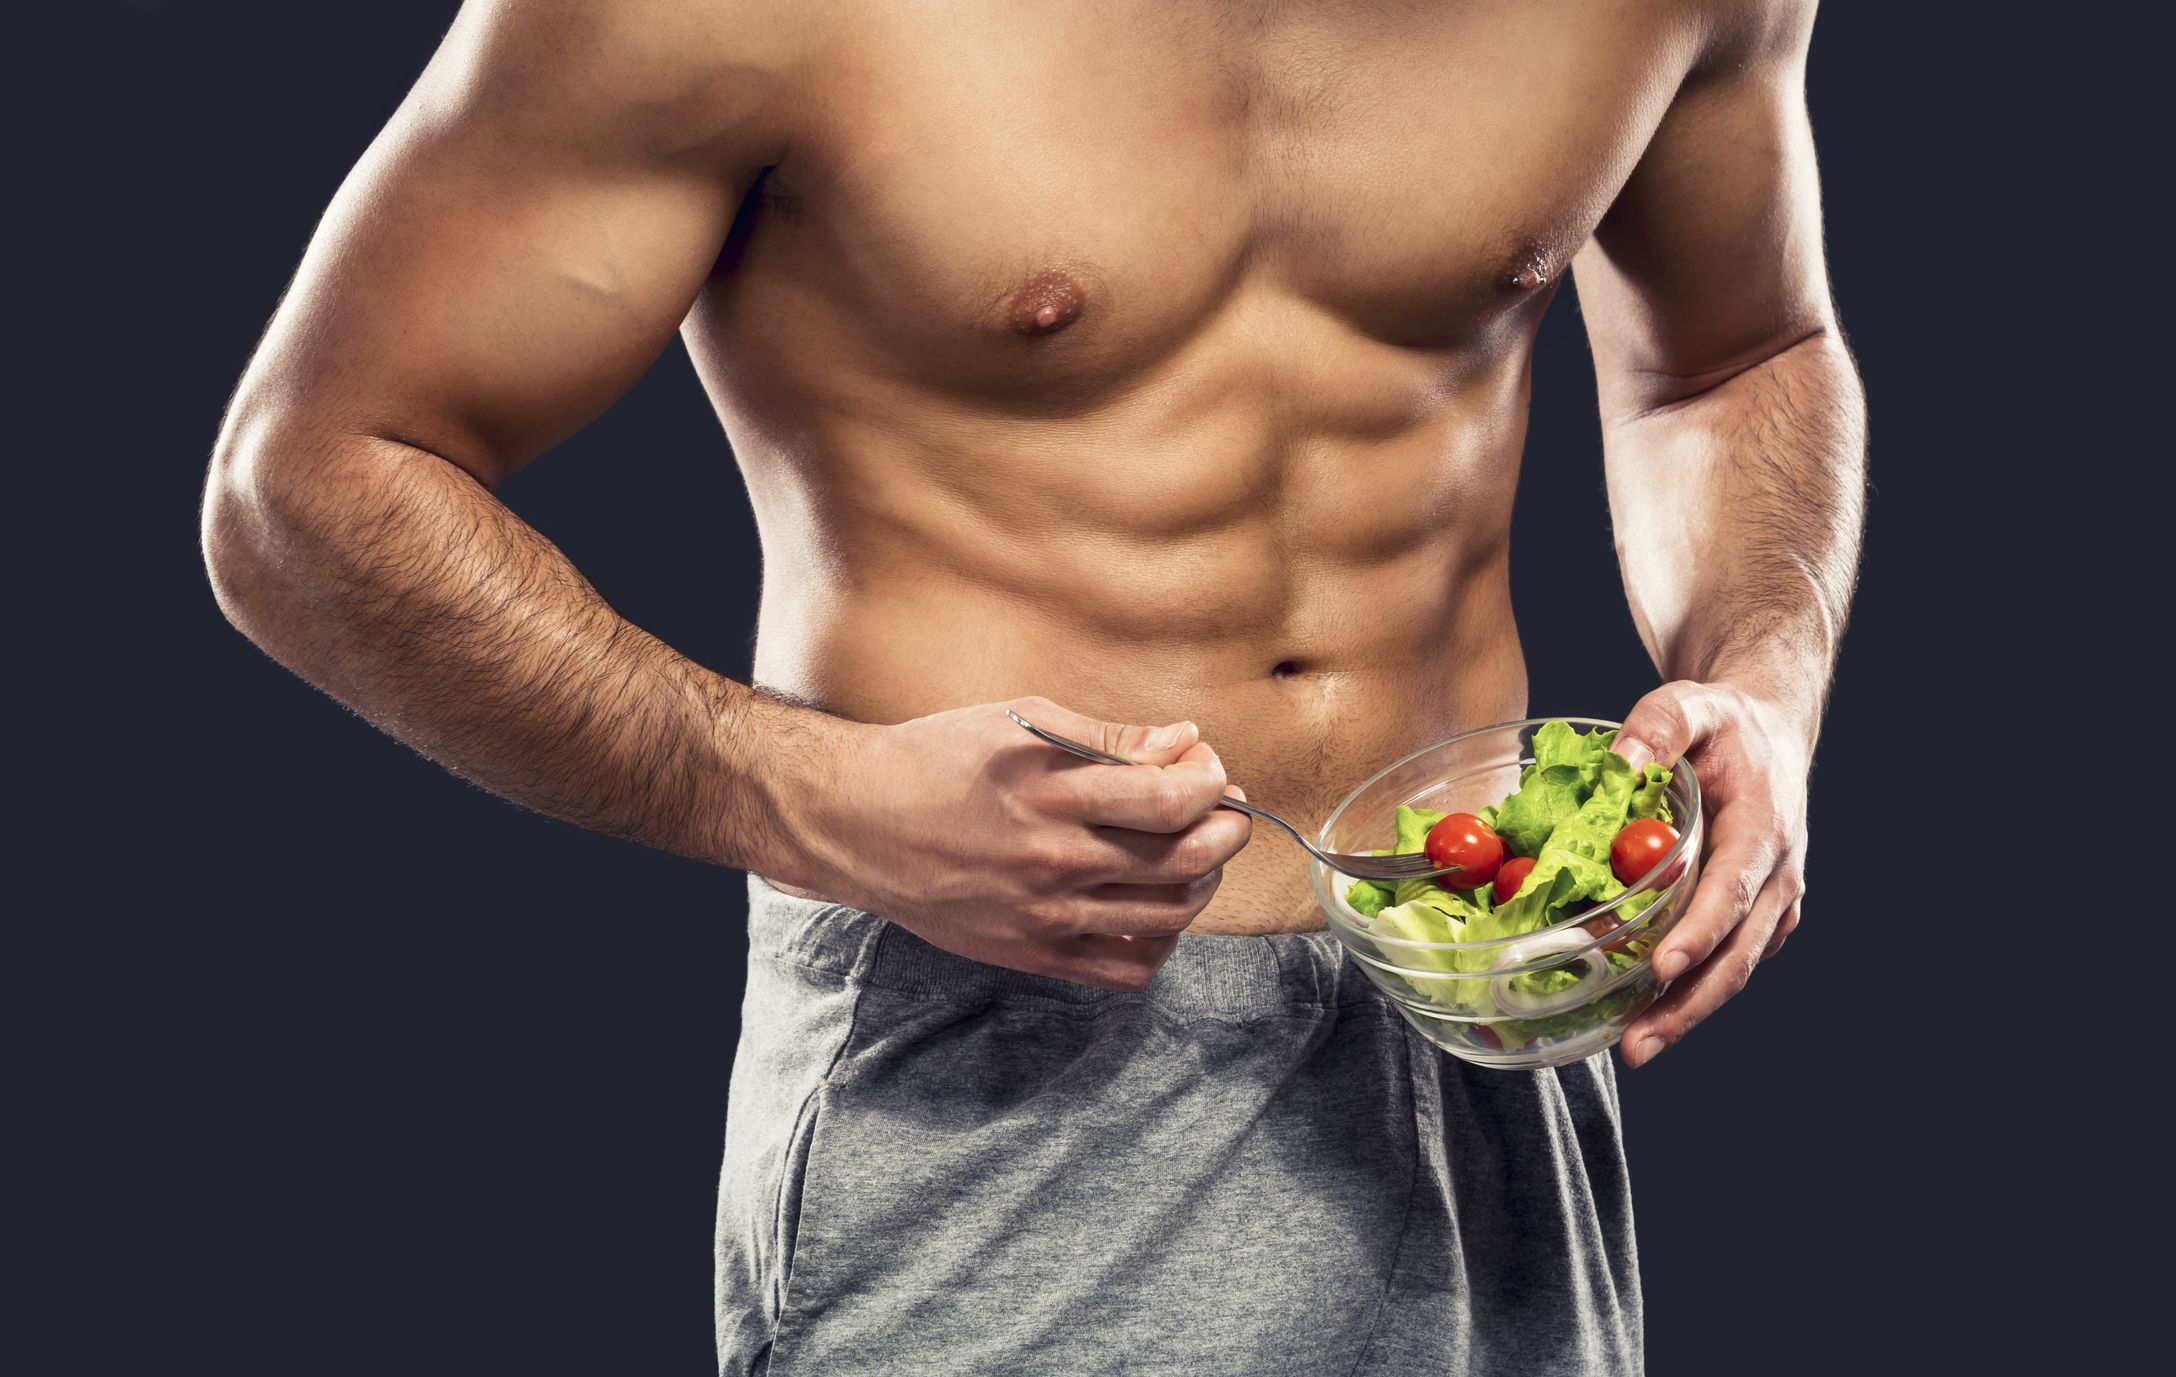 How to Get Abs Fast: the 3-Step Guide to Building a Six Pack